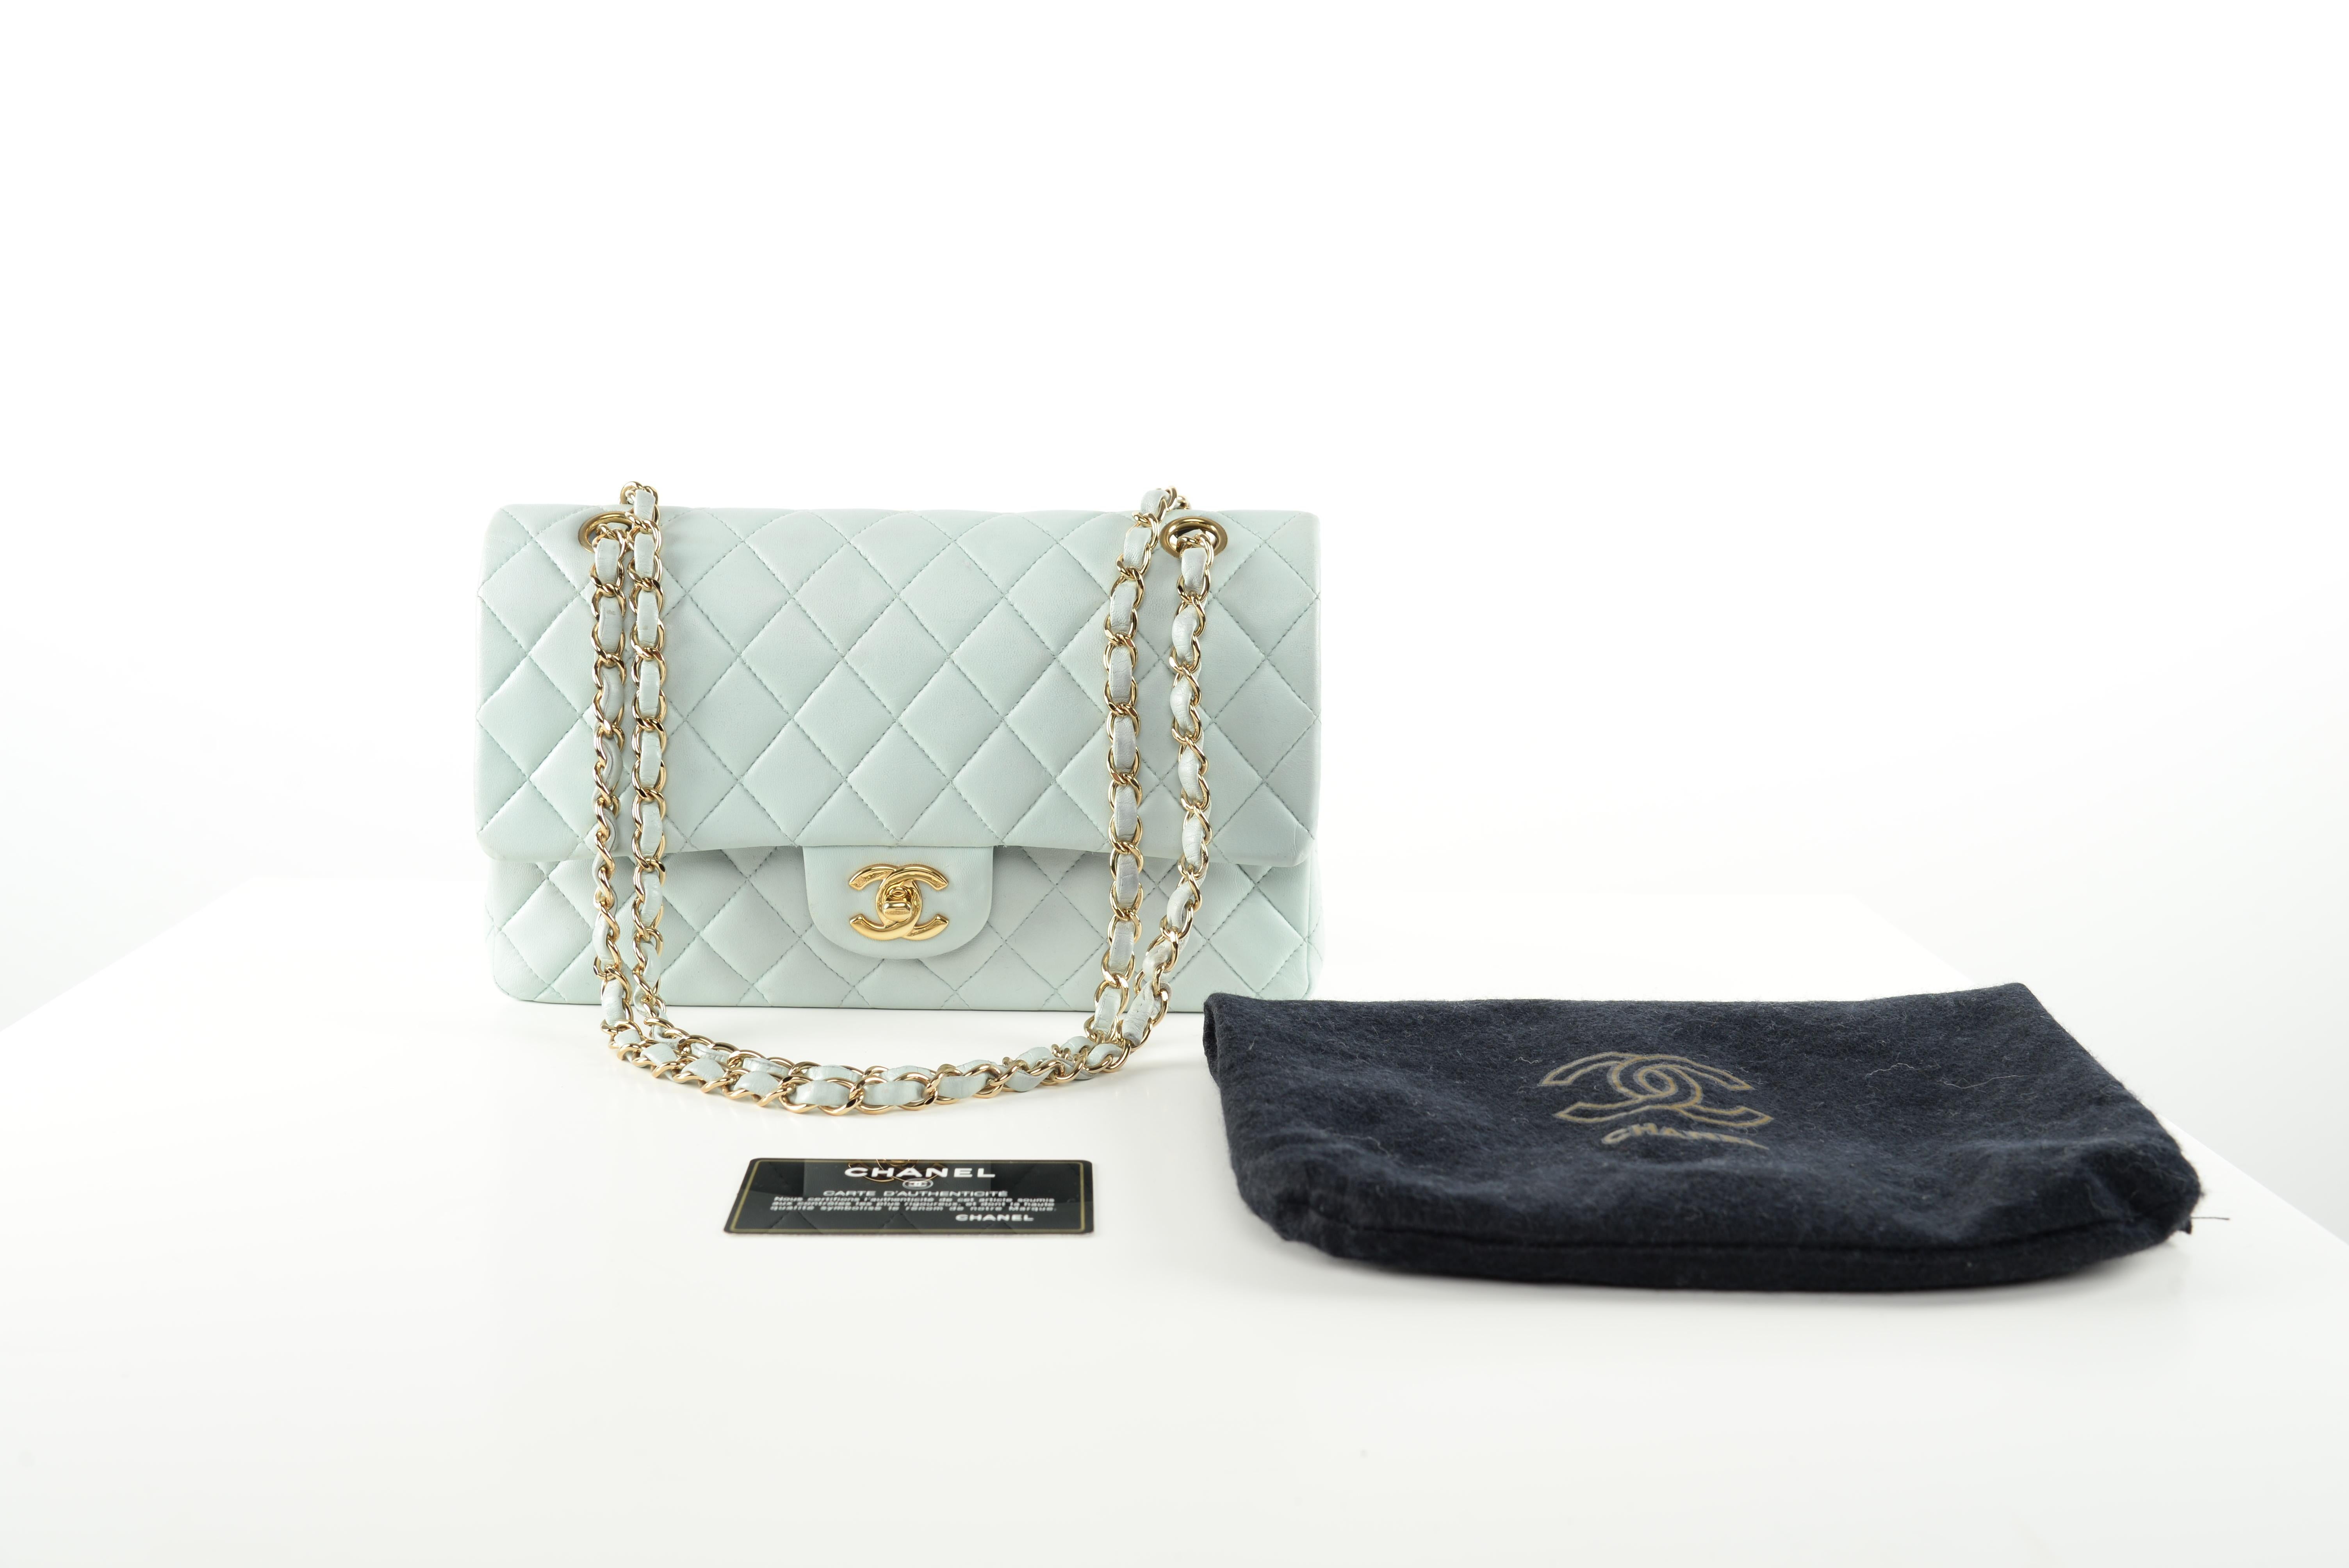 From the collection of SAVINETI we offer this Chanel Classic Flap Baby Blue:
-	Brand: Chanel
-	Model: Classic Flap Medium Baby Blue
-	Year: 2002-2003
-	Code: 7394630
-	Condition: Good Vintage Condition (normal signs of use, slightly